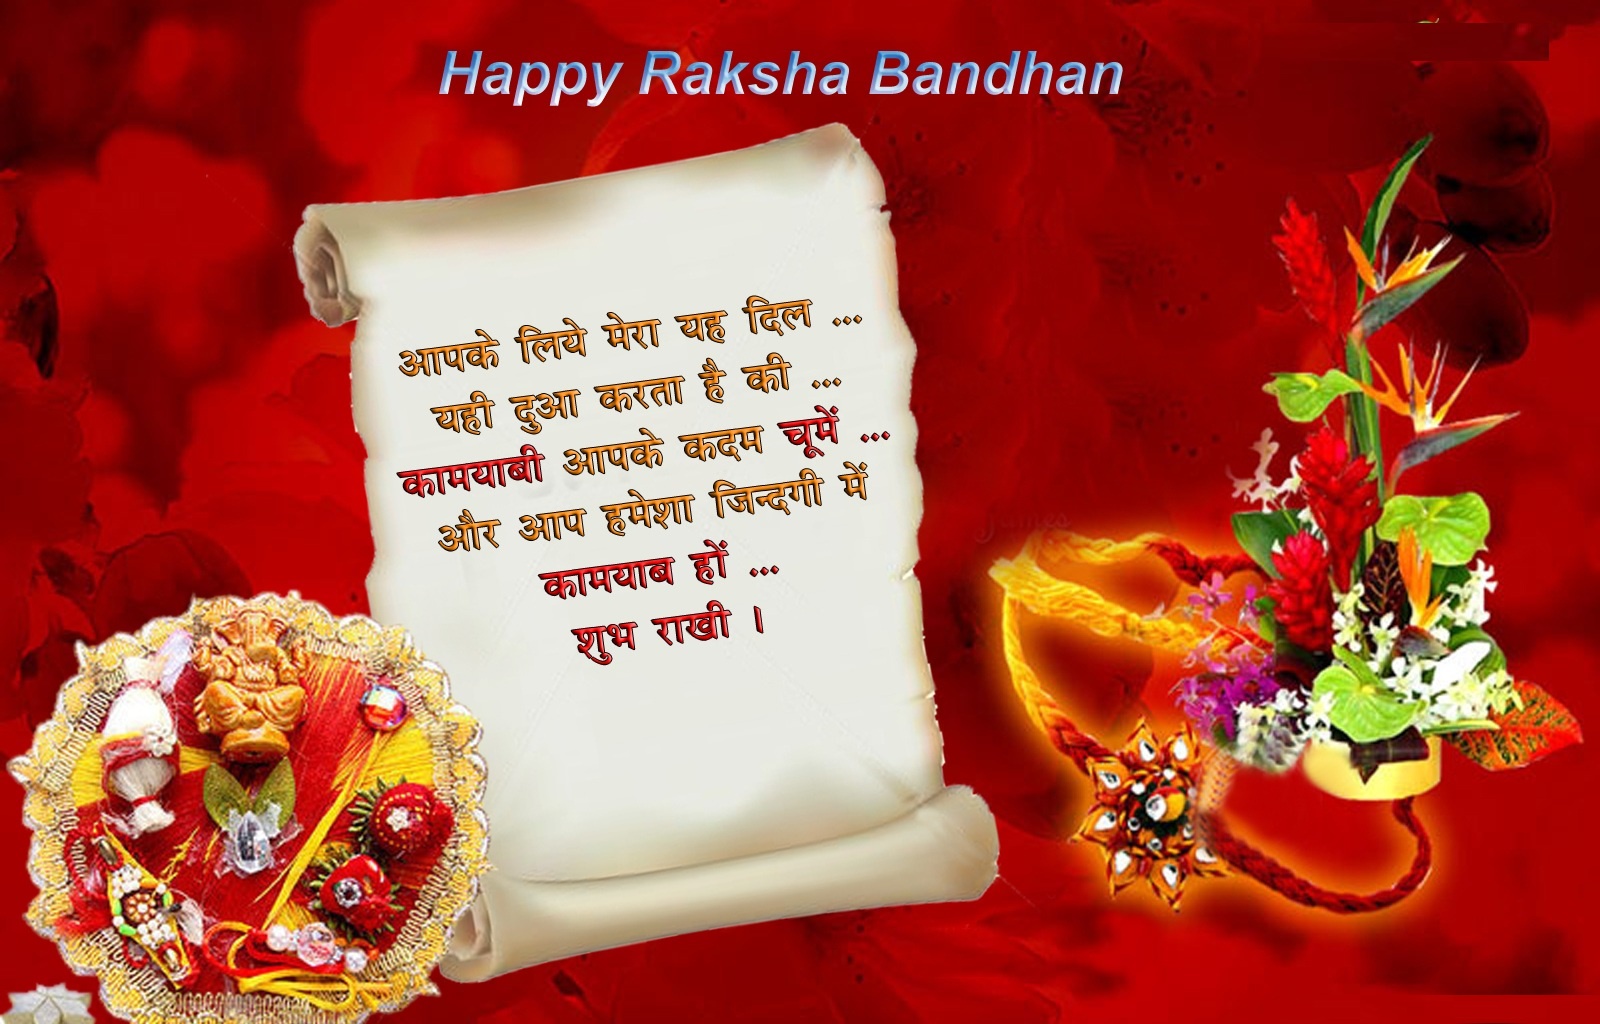 50 Best Happy Raksha Bandhan Quotes, Wishes for Brothers & Sisters ...